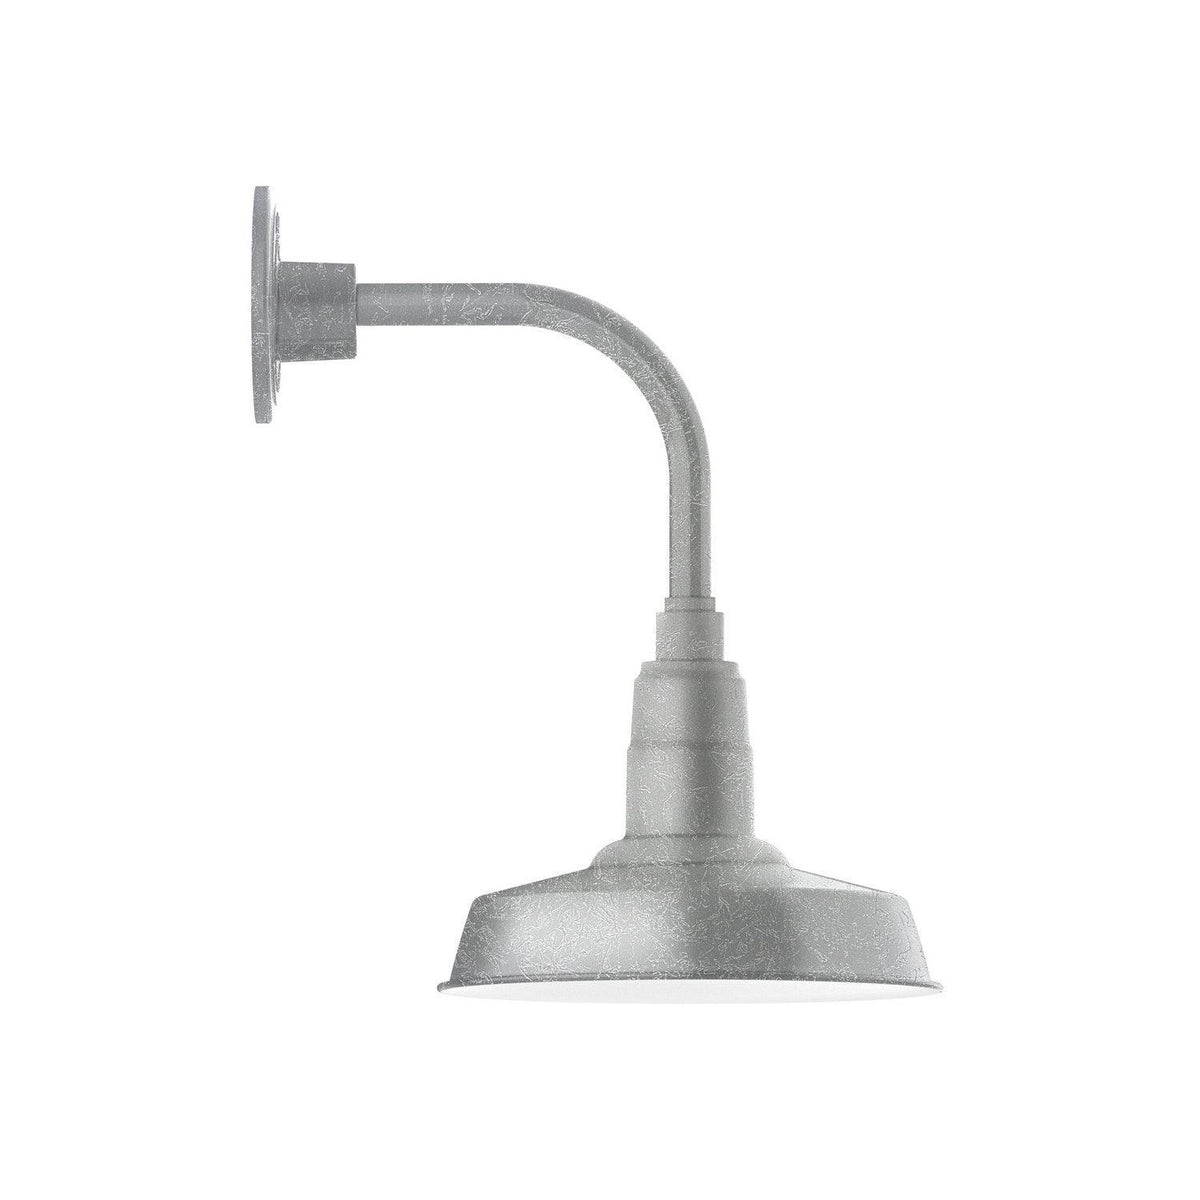 Montclair Light Works - Warehouse 10" Curved Arm Wall Light - GNT181-49 | Montreal Lighting & Hardware